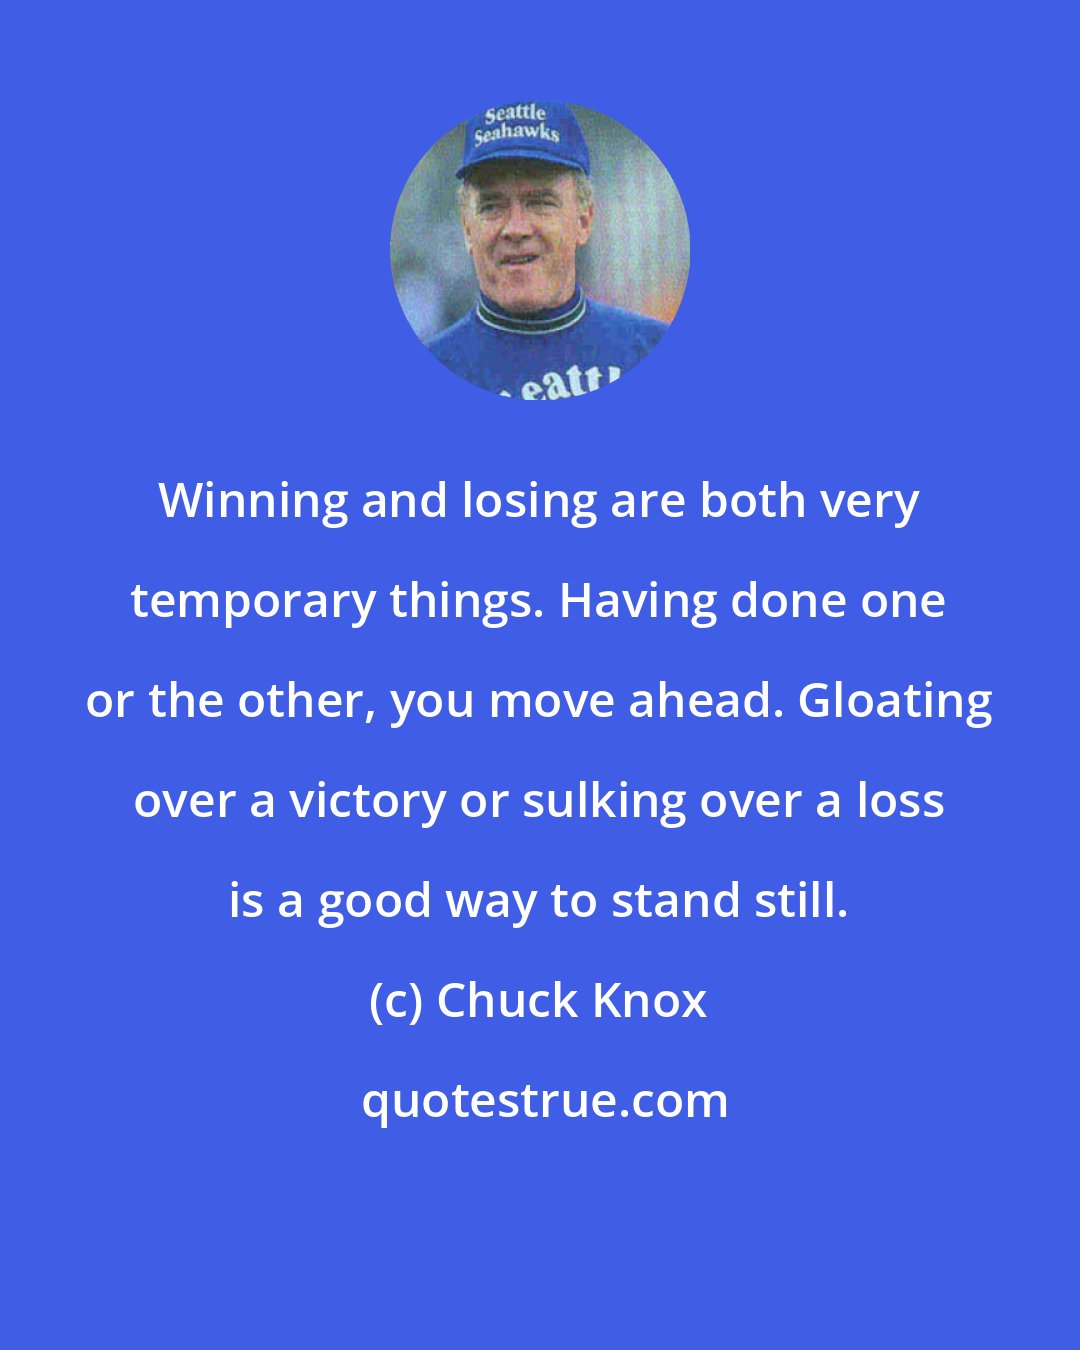 Chuck Knox: Winning and losing are both very temporary things. Having done one or the other, you move ahead. Gloating over a victory or sulking over a loss is a good way to stand still.